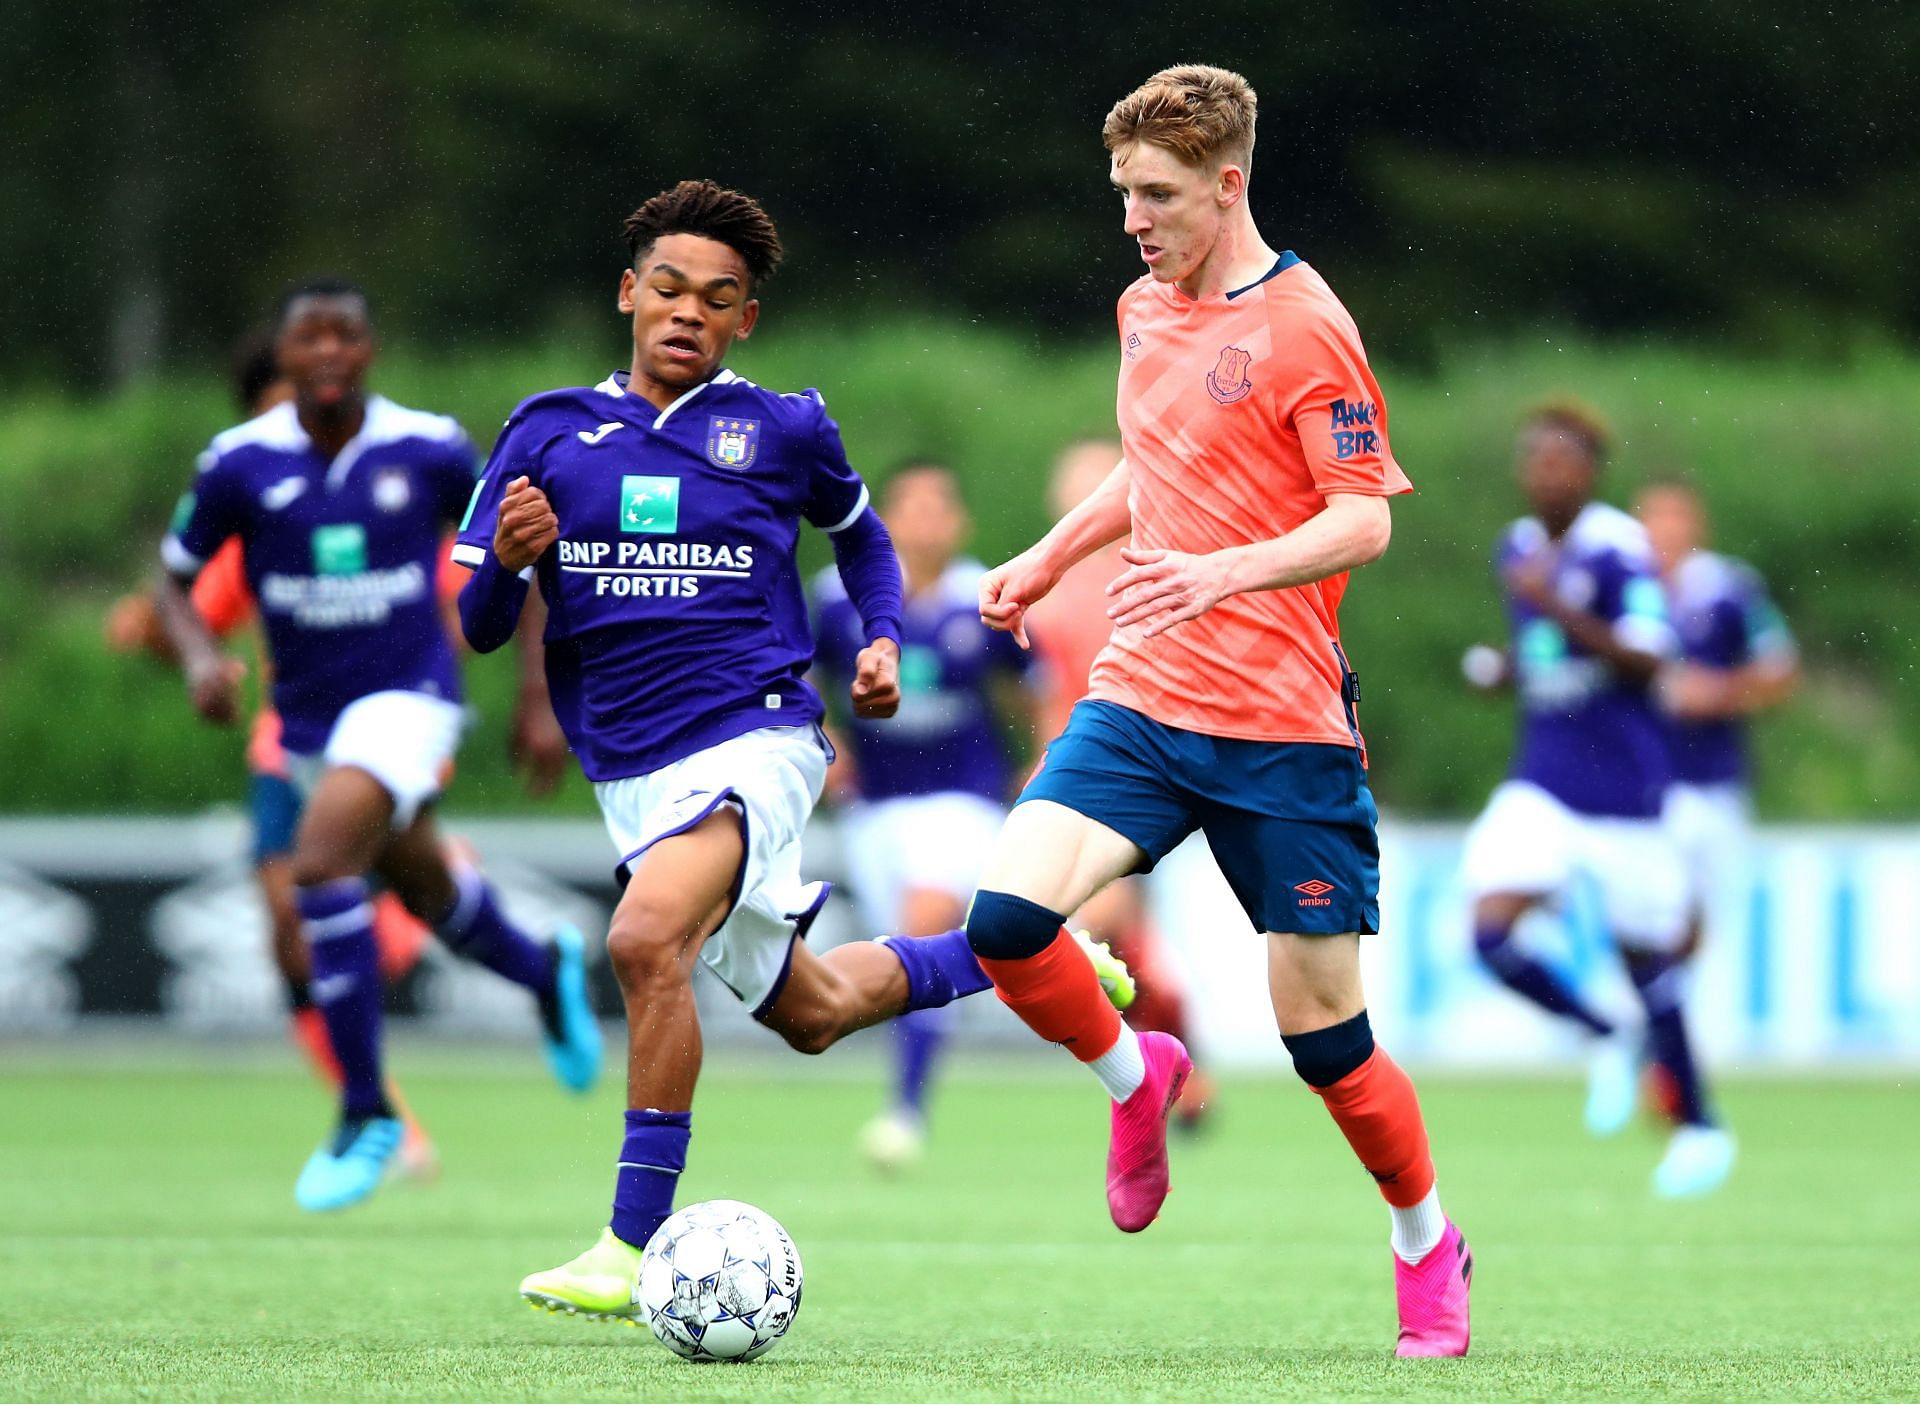 Anderlecht will look to make in three wins in four as they take on Sint-Truiden.